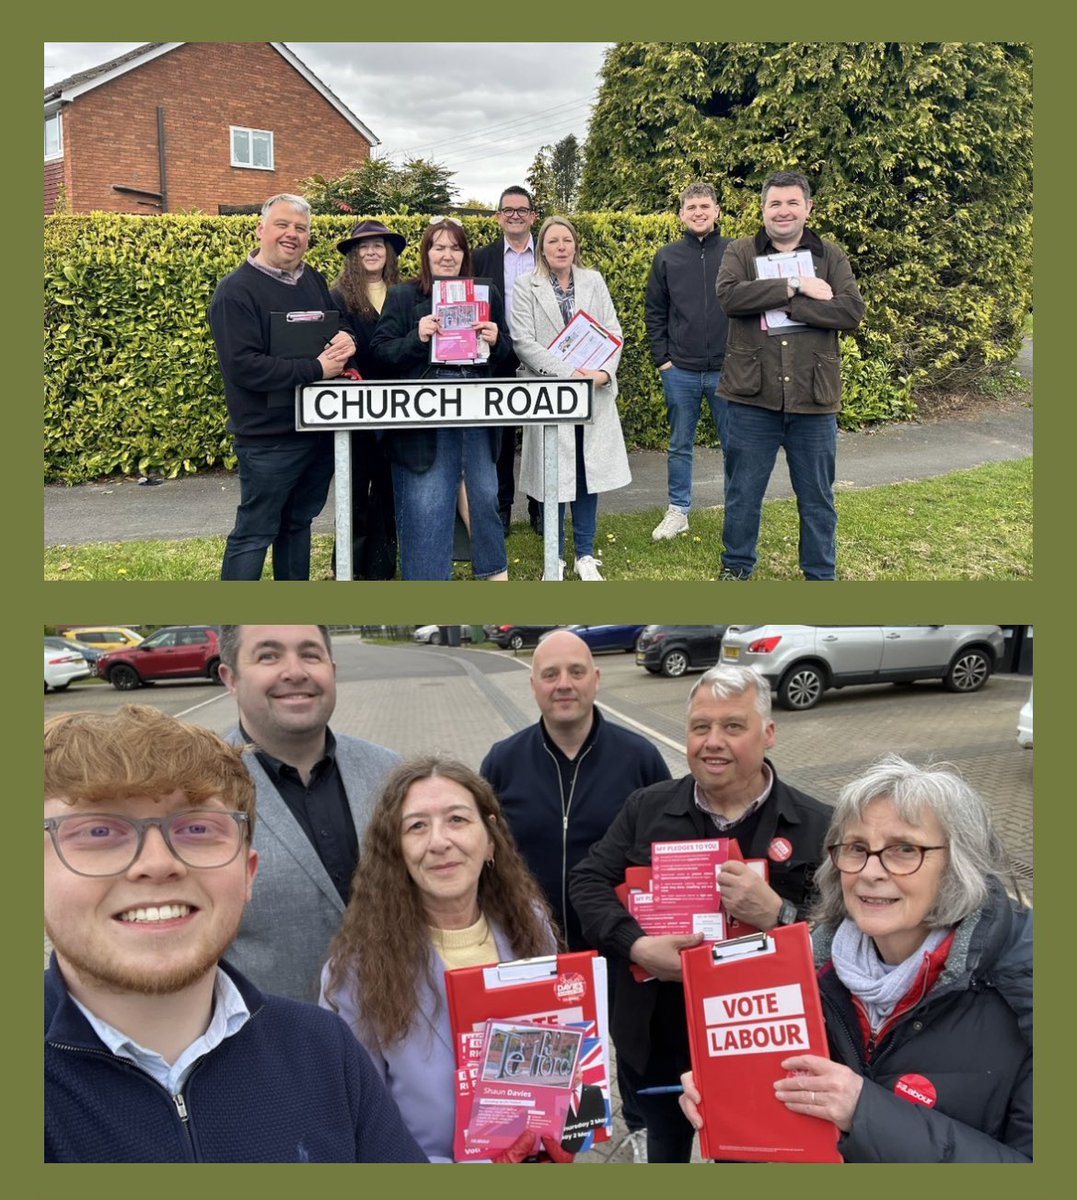 Our teams have been out speaking to residents in St Geroges and Donnington today about Labour’s plan to get Britain’s future back 🌹 Thank you to everybody who spoke to us ⭐️ #labourdoorstep